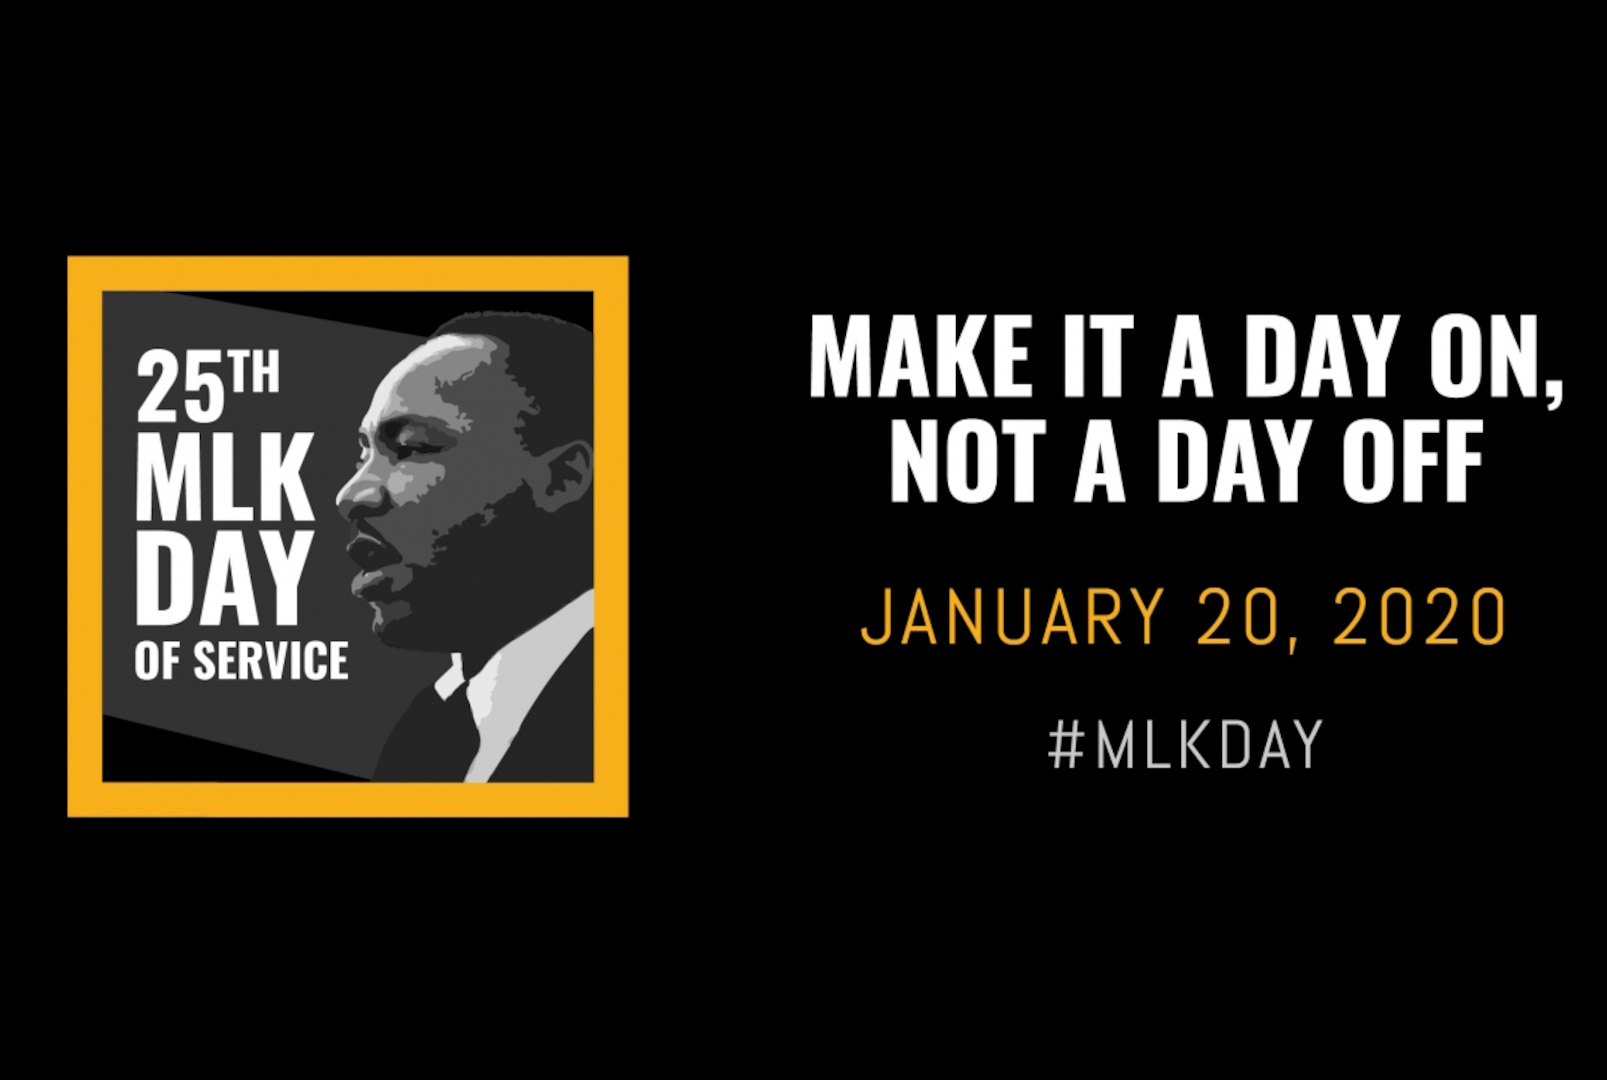 Graphic promoting MLD Day of Service